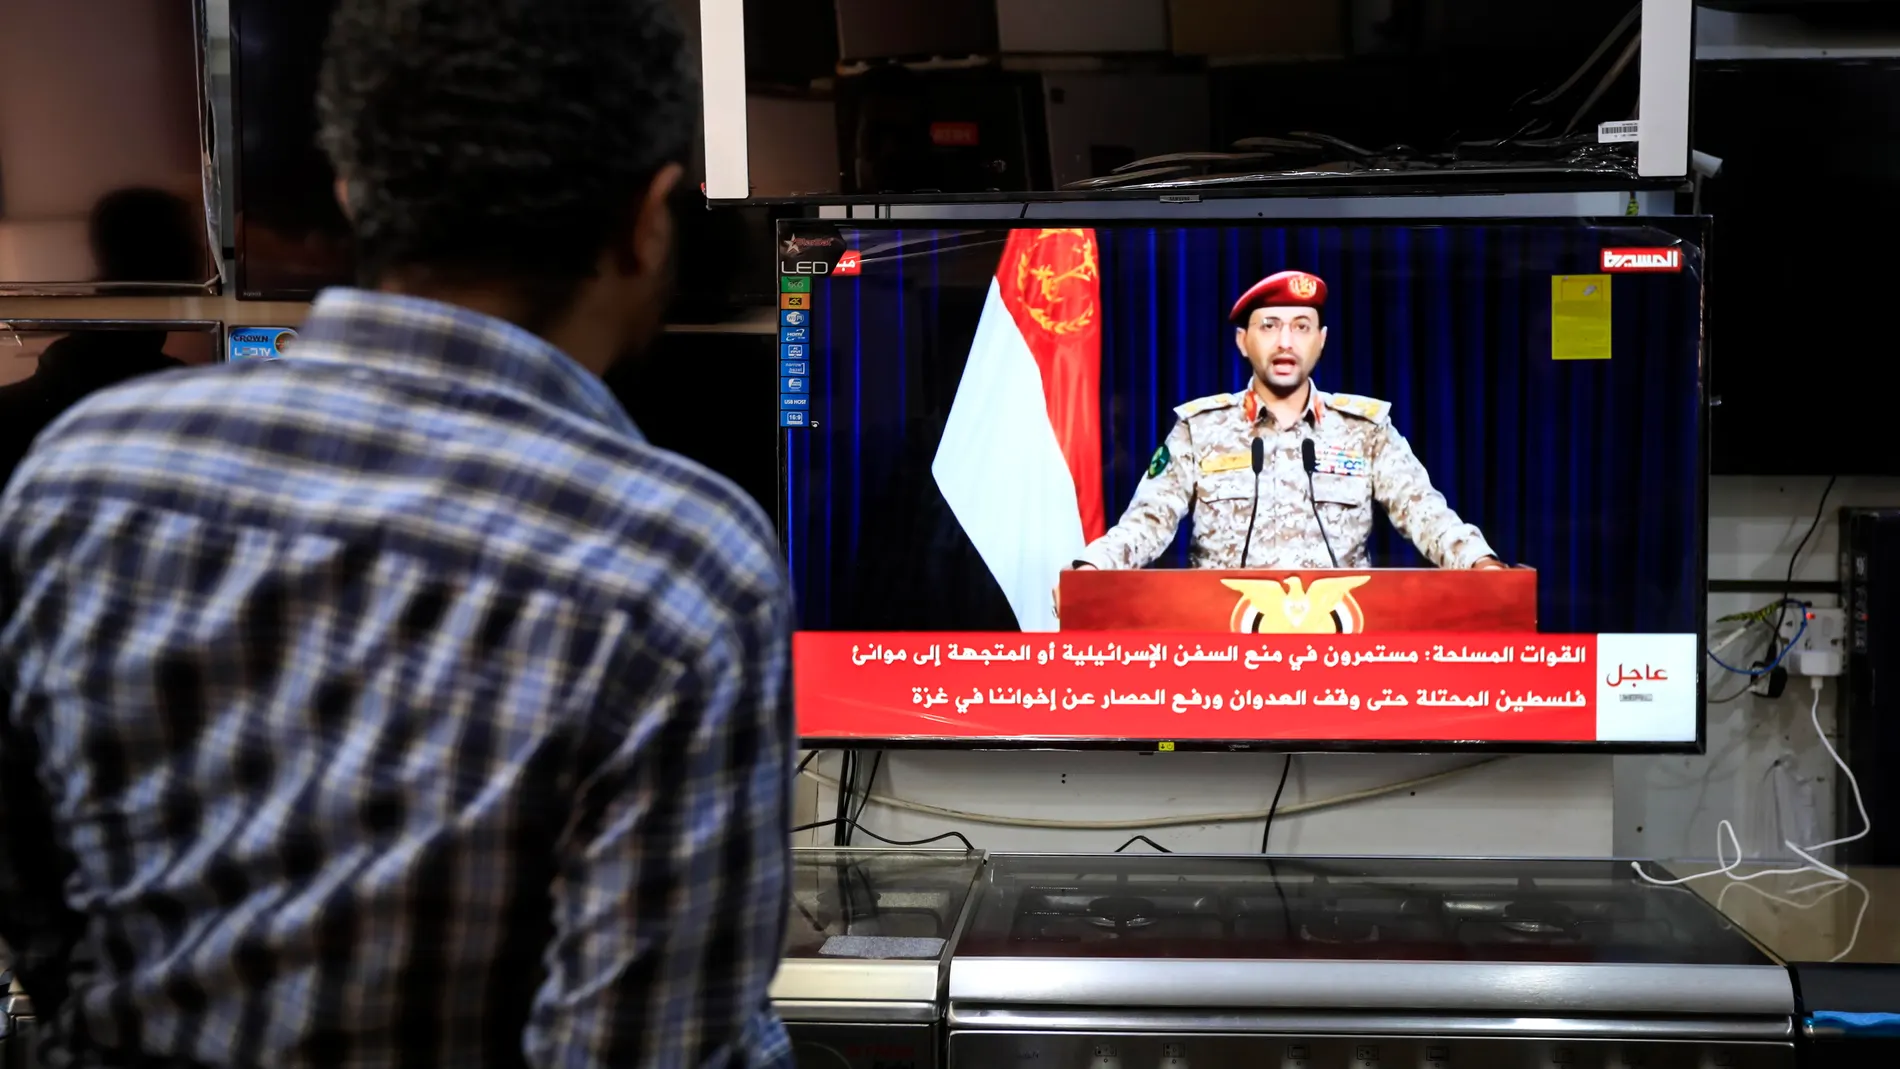 Sana'a (Yemen), 10/01/2024.- A person watches a TV statement by the Houthis' military spokesman Yahya Sarea following a large-scale missile and drone attack by Yemen's Houthis targeting shipping lanes in the Red Sea, in Sana'a, Yemen, 10 January 2024. According to the Houthis military spokesman Yahya Sarea, Yemen's Houthis have launched large-scale missile and drone attack against international shipping lanes in the Red Sea, in response to a previous US Navy attack on Houthi boats in the Red ...